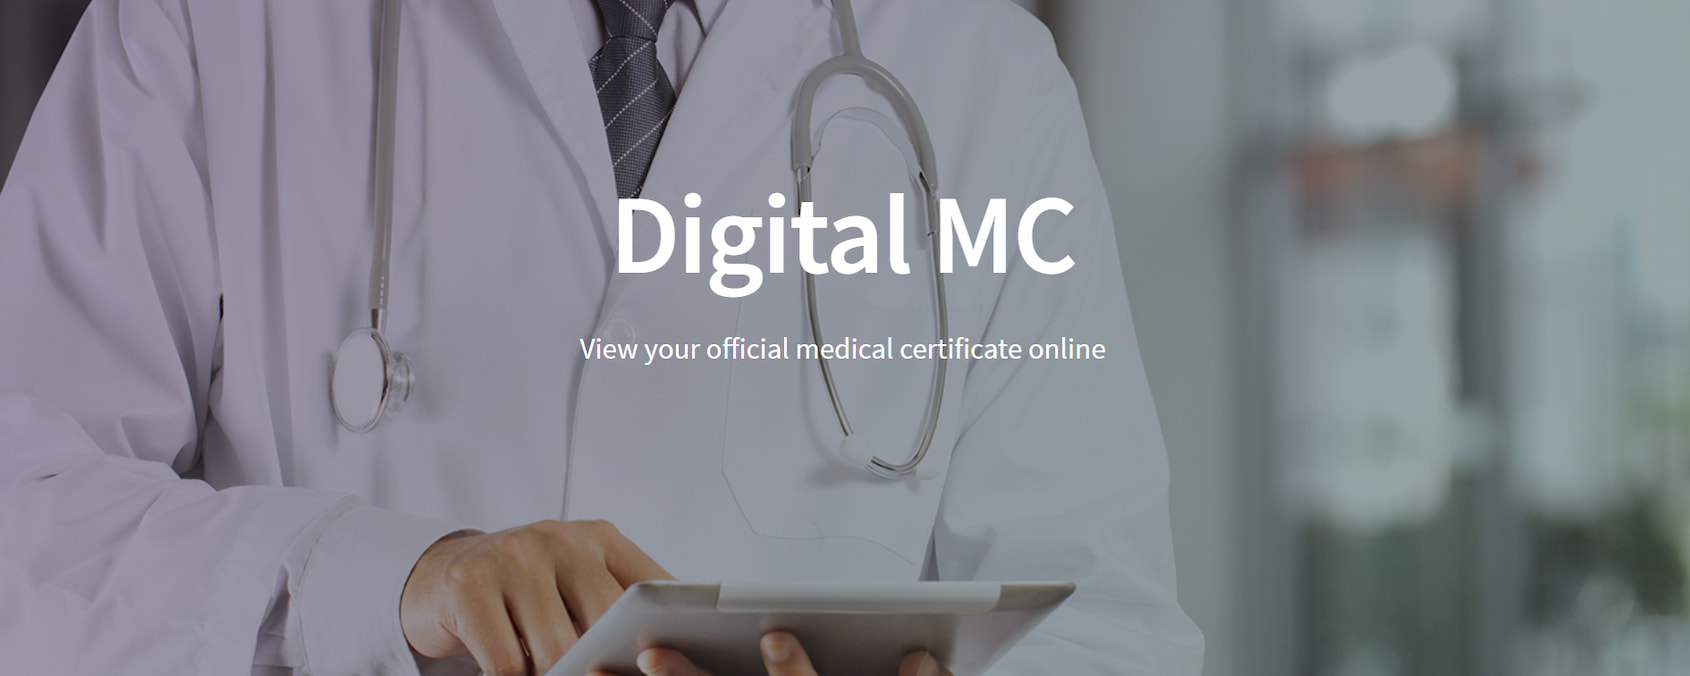 With Digital MC, you can view your official medical certificates online